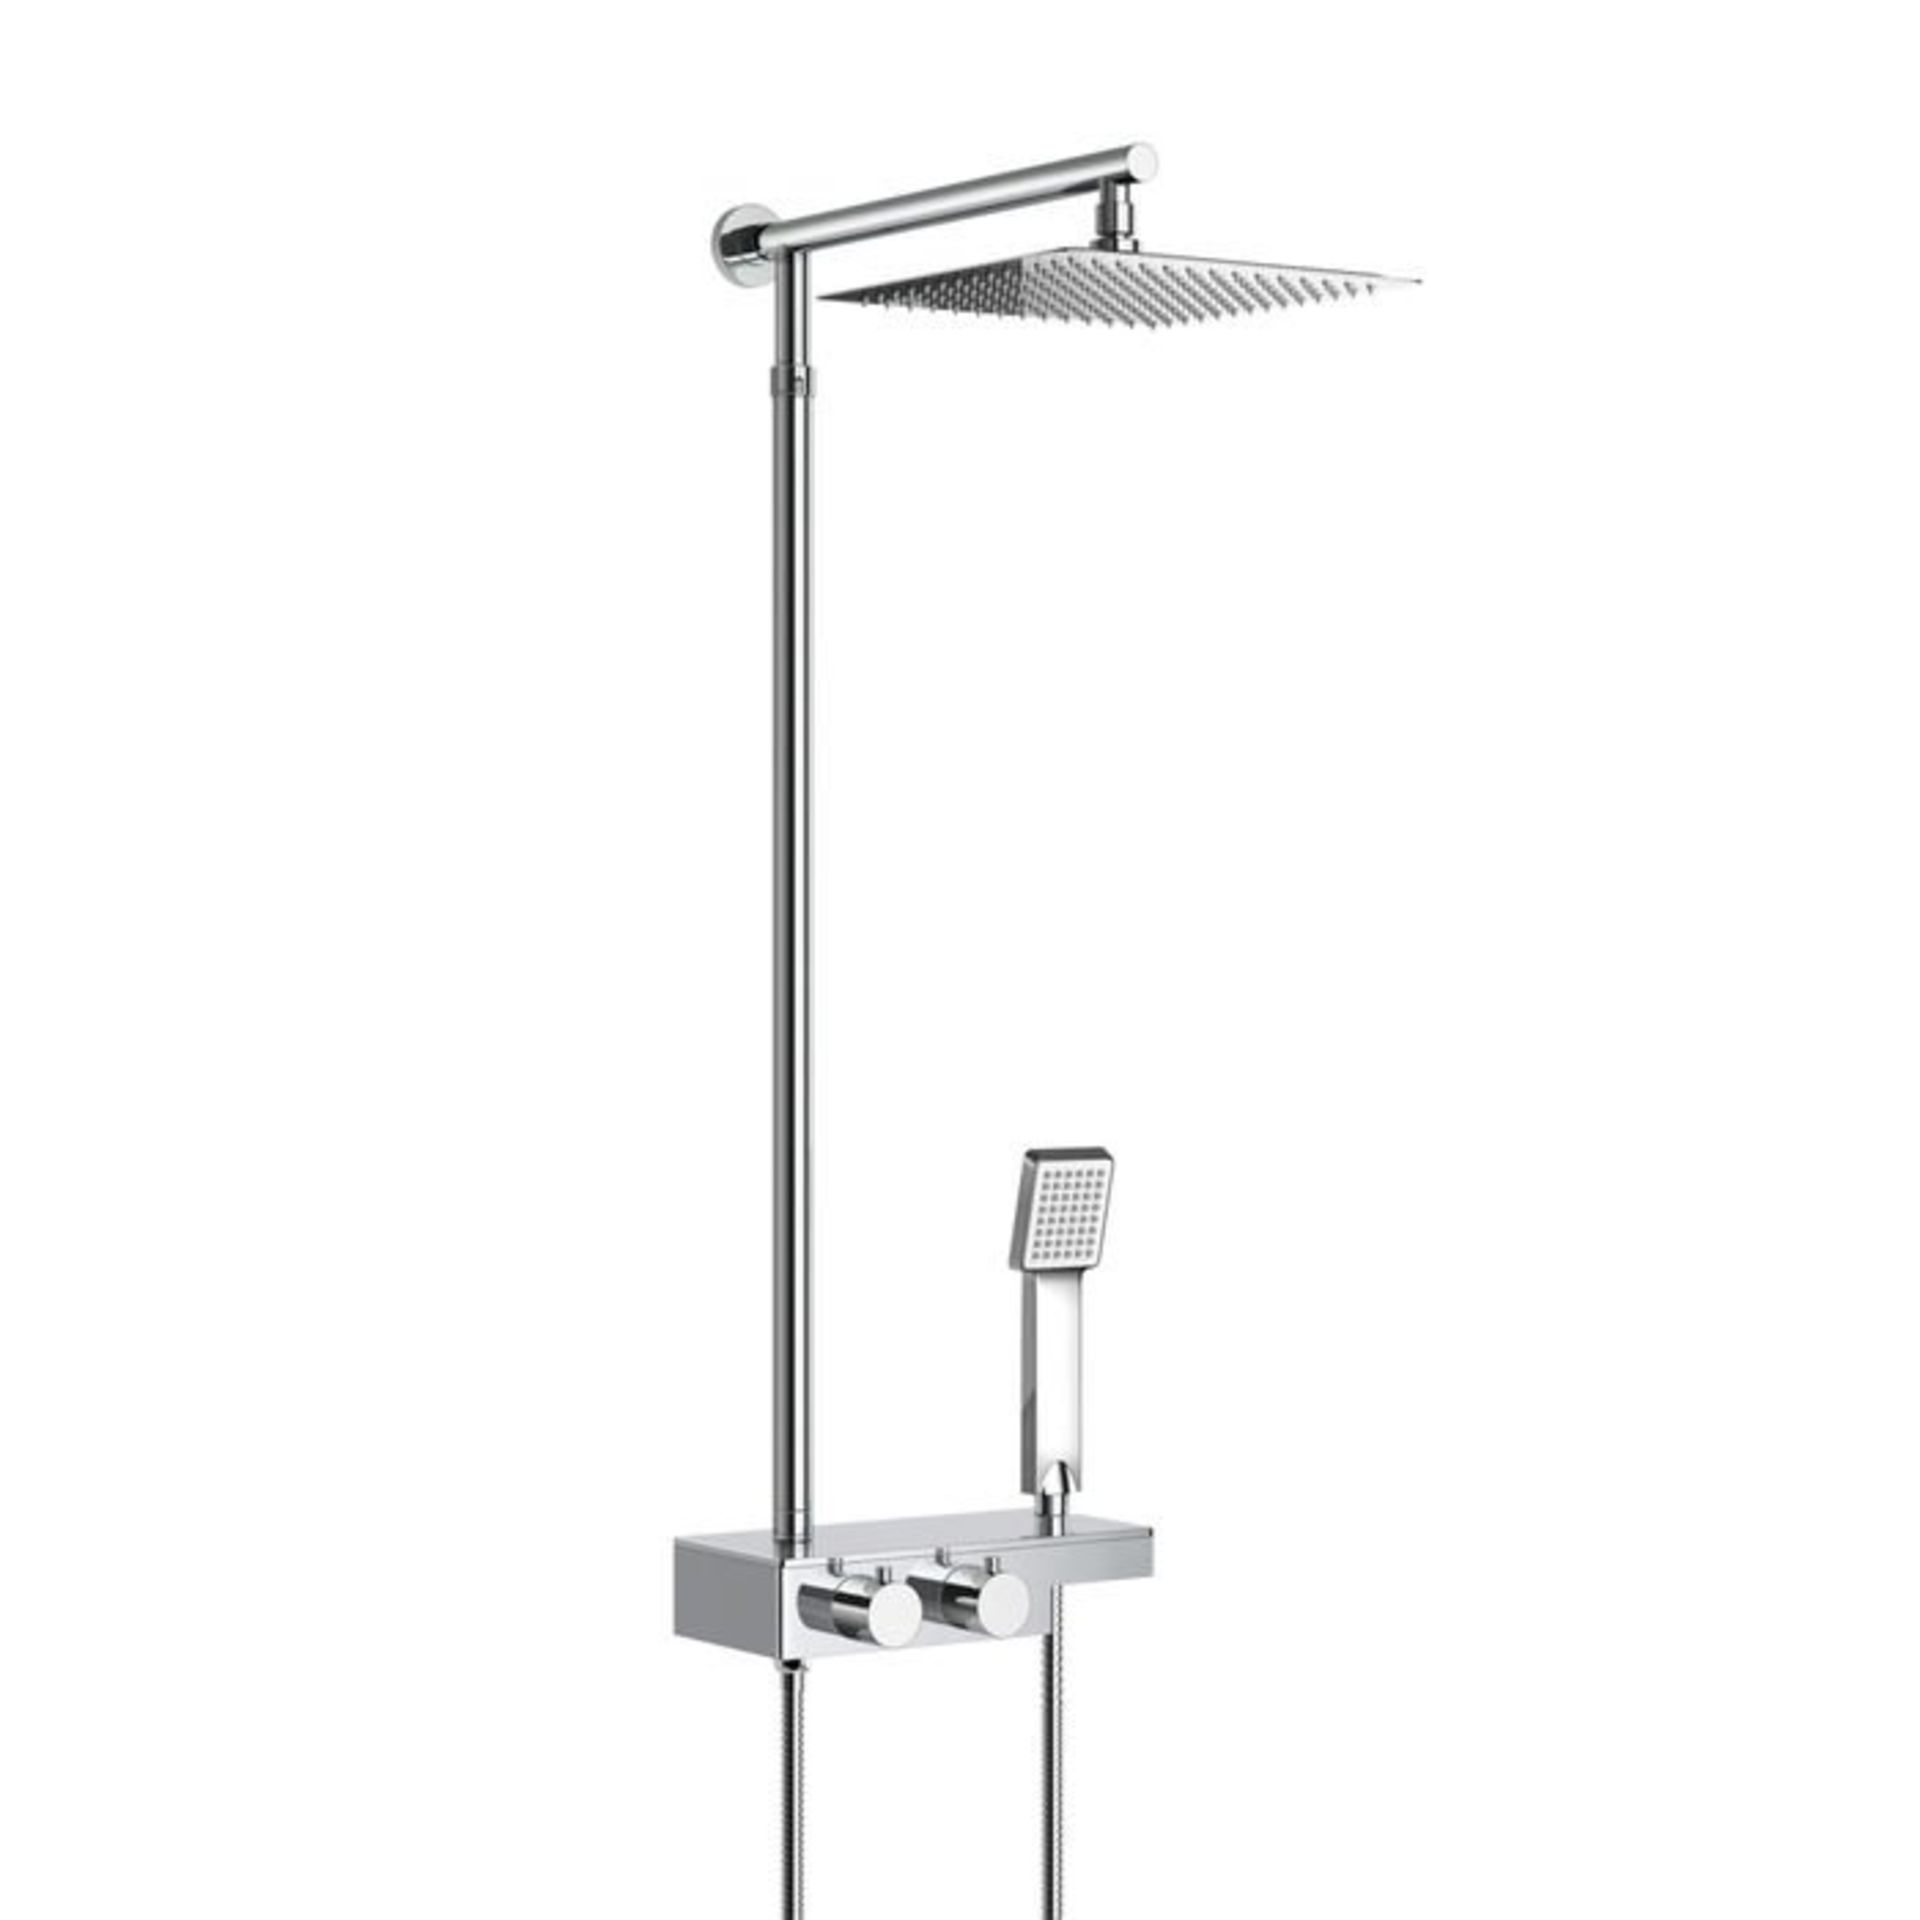 (H213) Square Exposed Thermostatic Shower Shelf, Kit & Large Head. RRP £349.99. Style meets function - Image 6 of 6